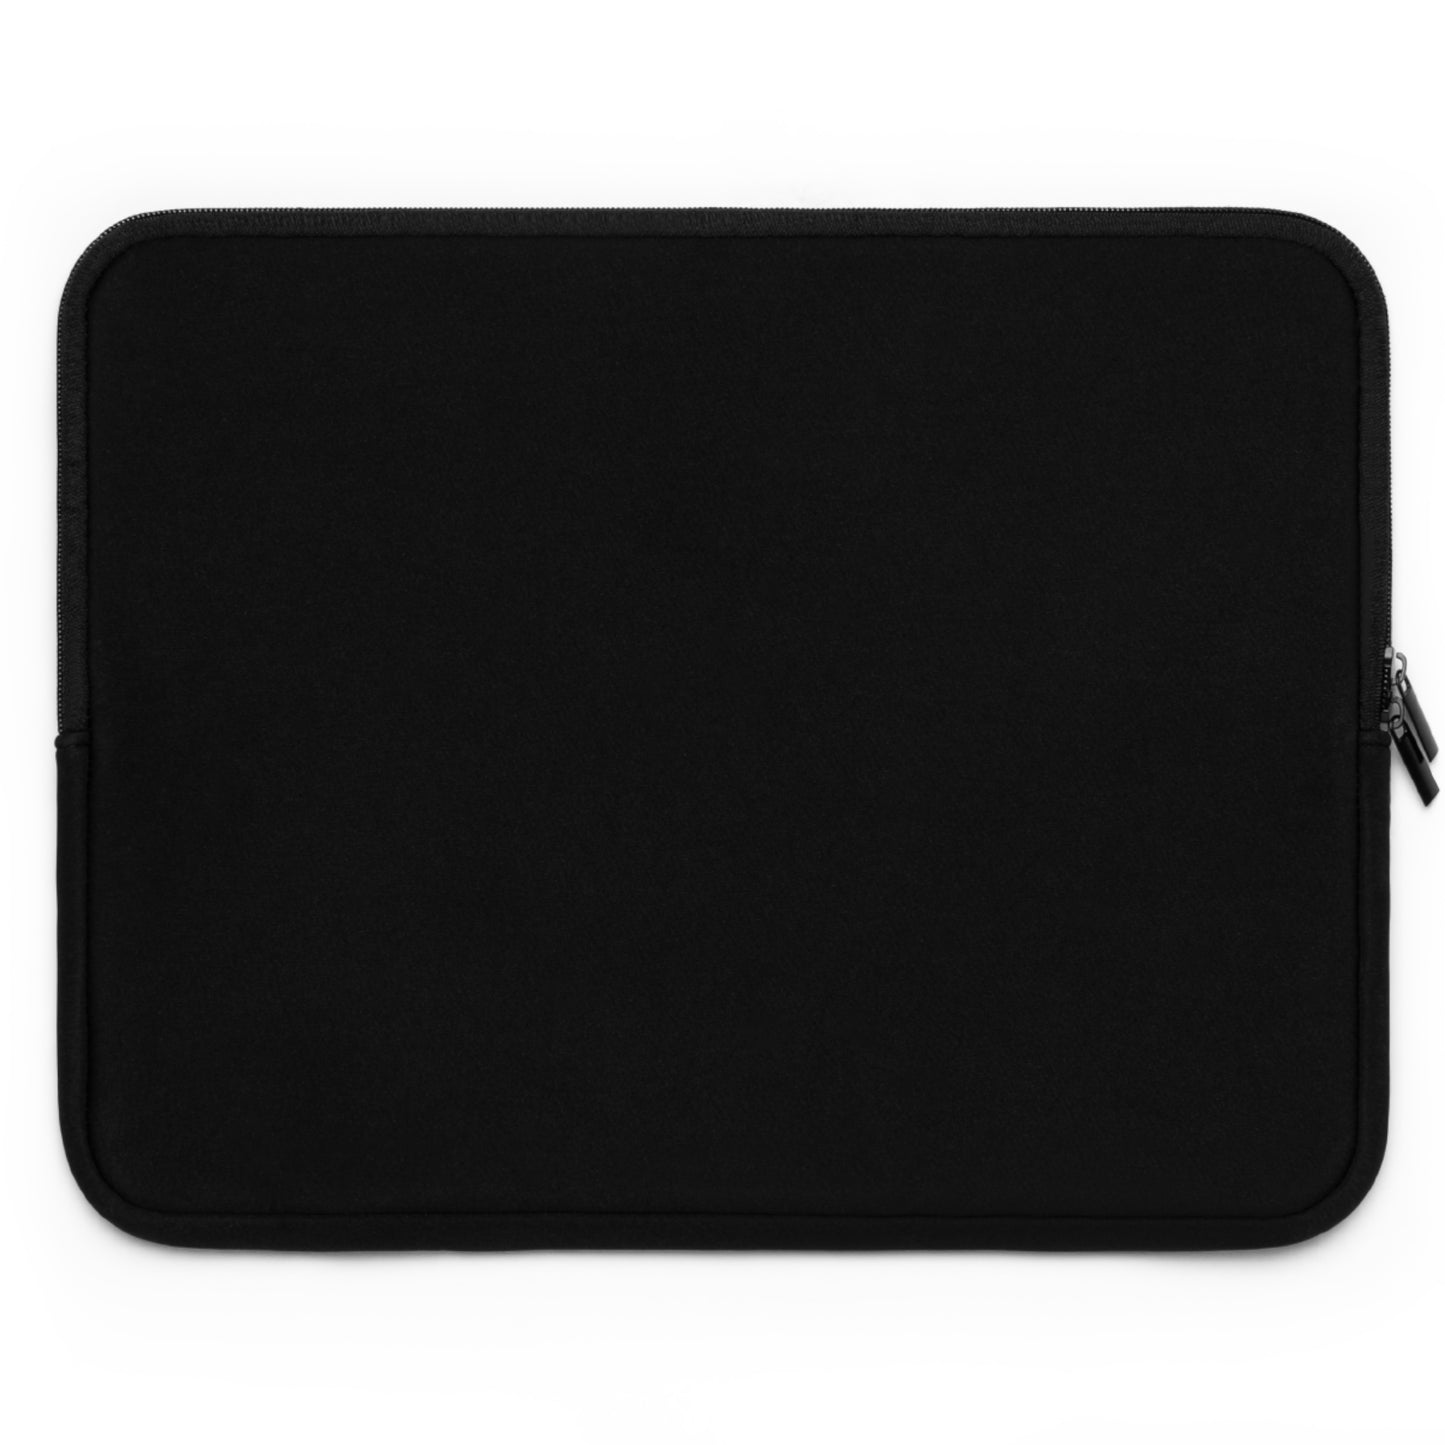 Sword and Scale Laptop Sleeve